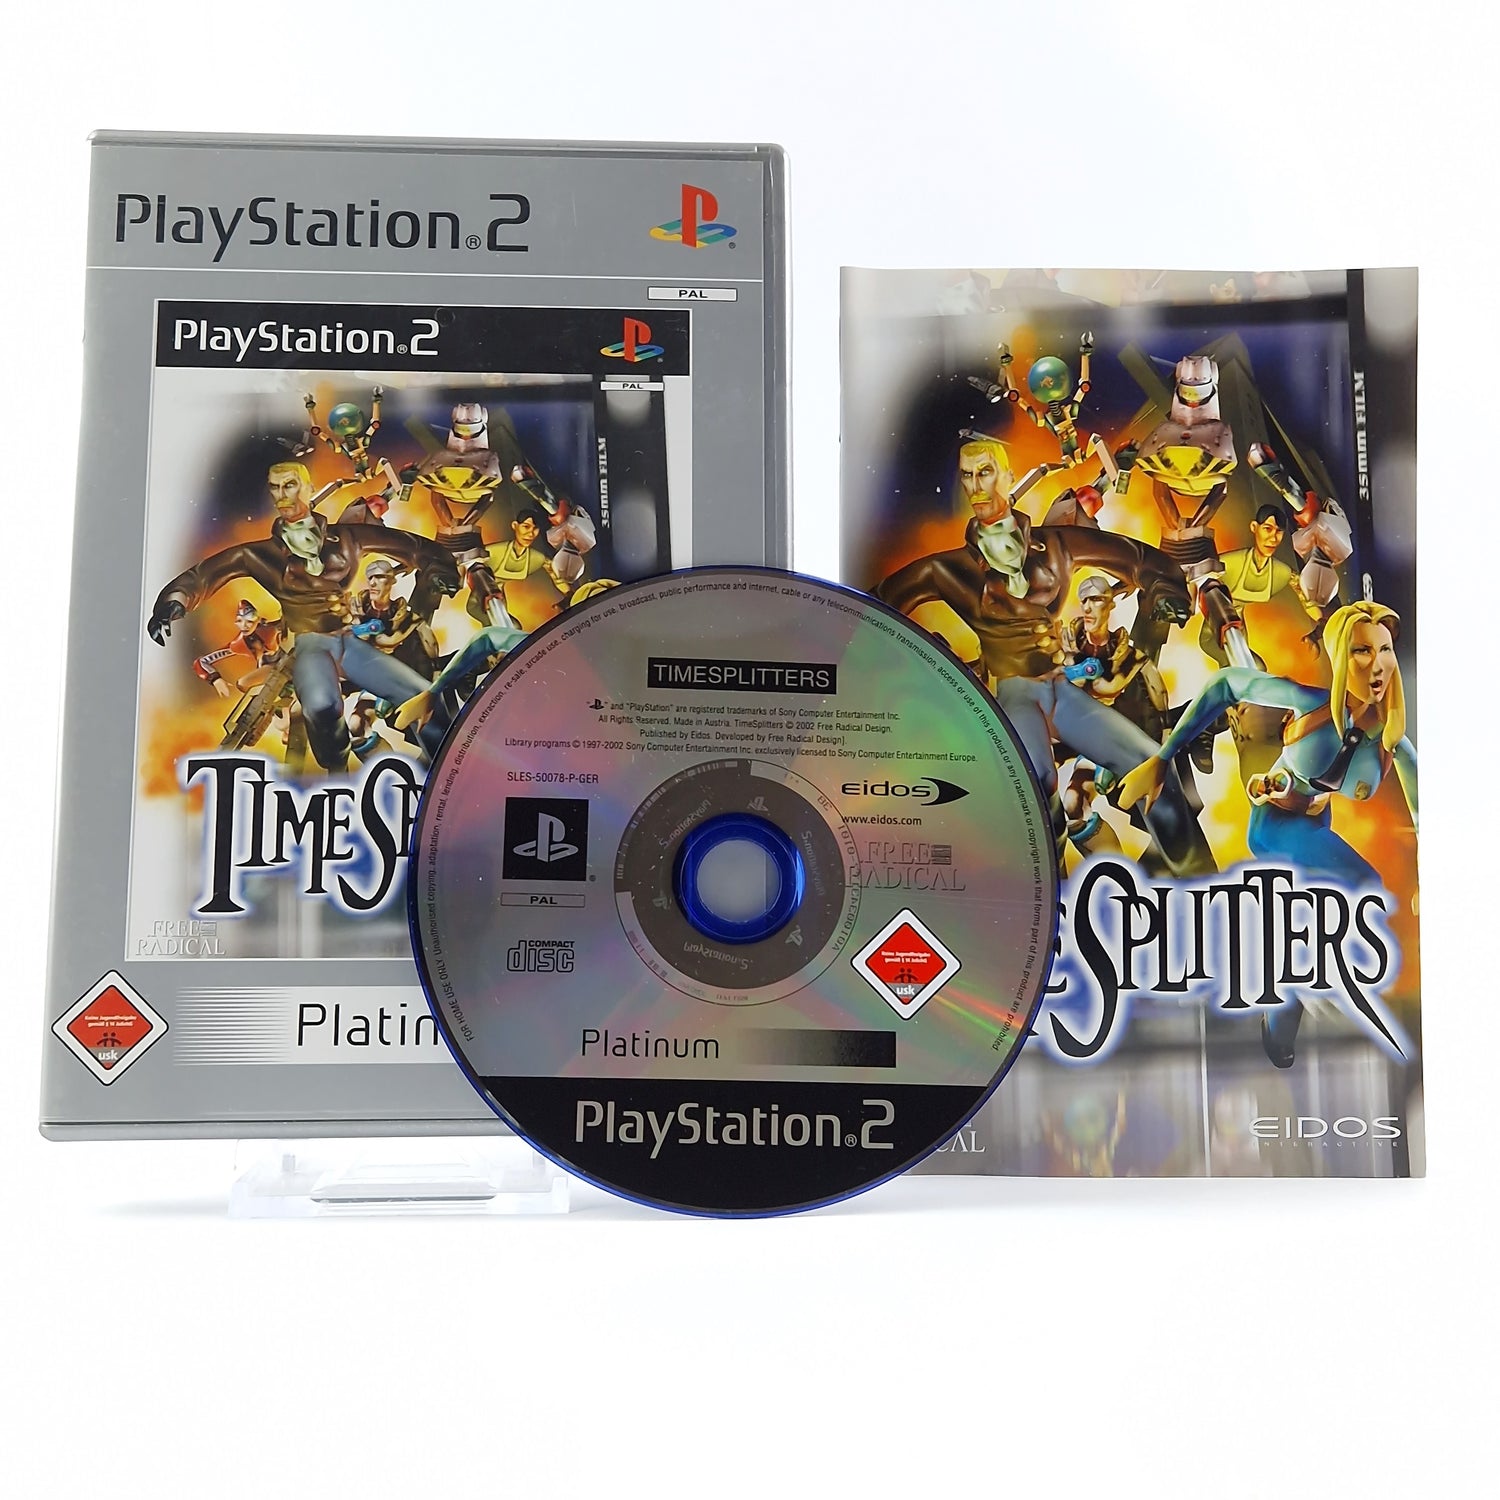 Playstation 2 Game: Time Splitters Platinum OVP Instructions CD | Sony PS2 USK18